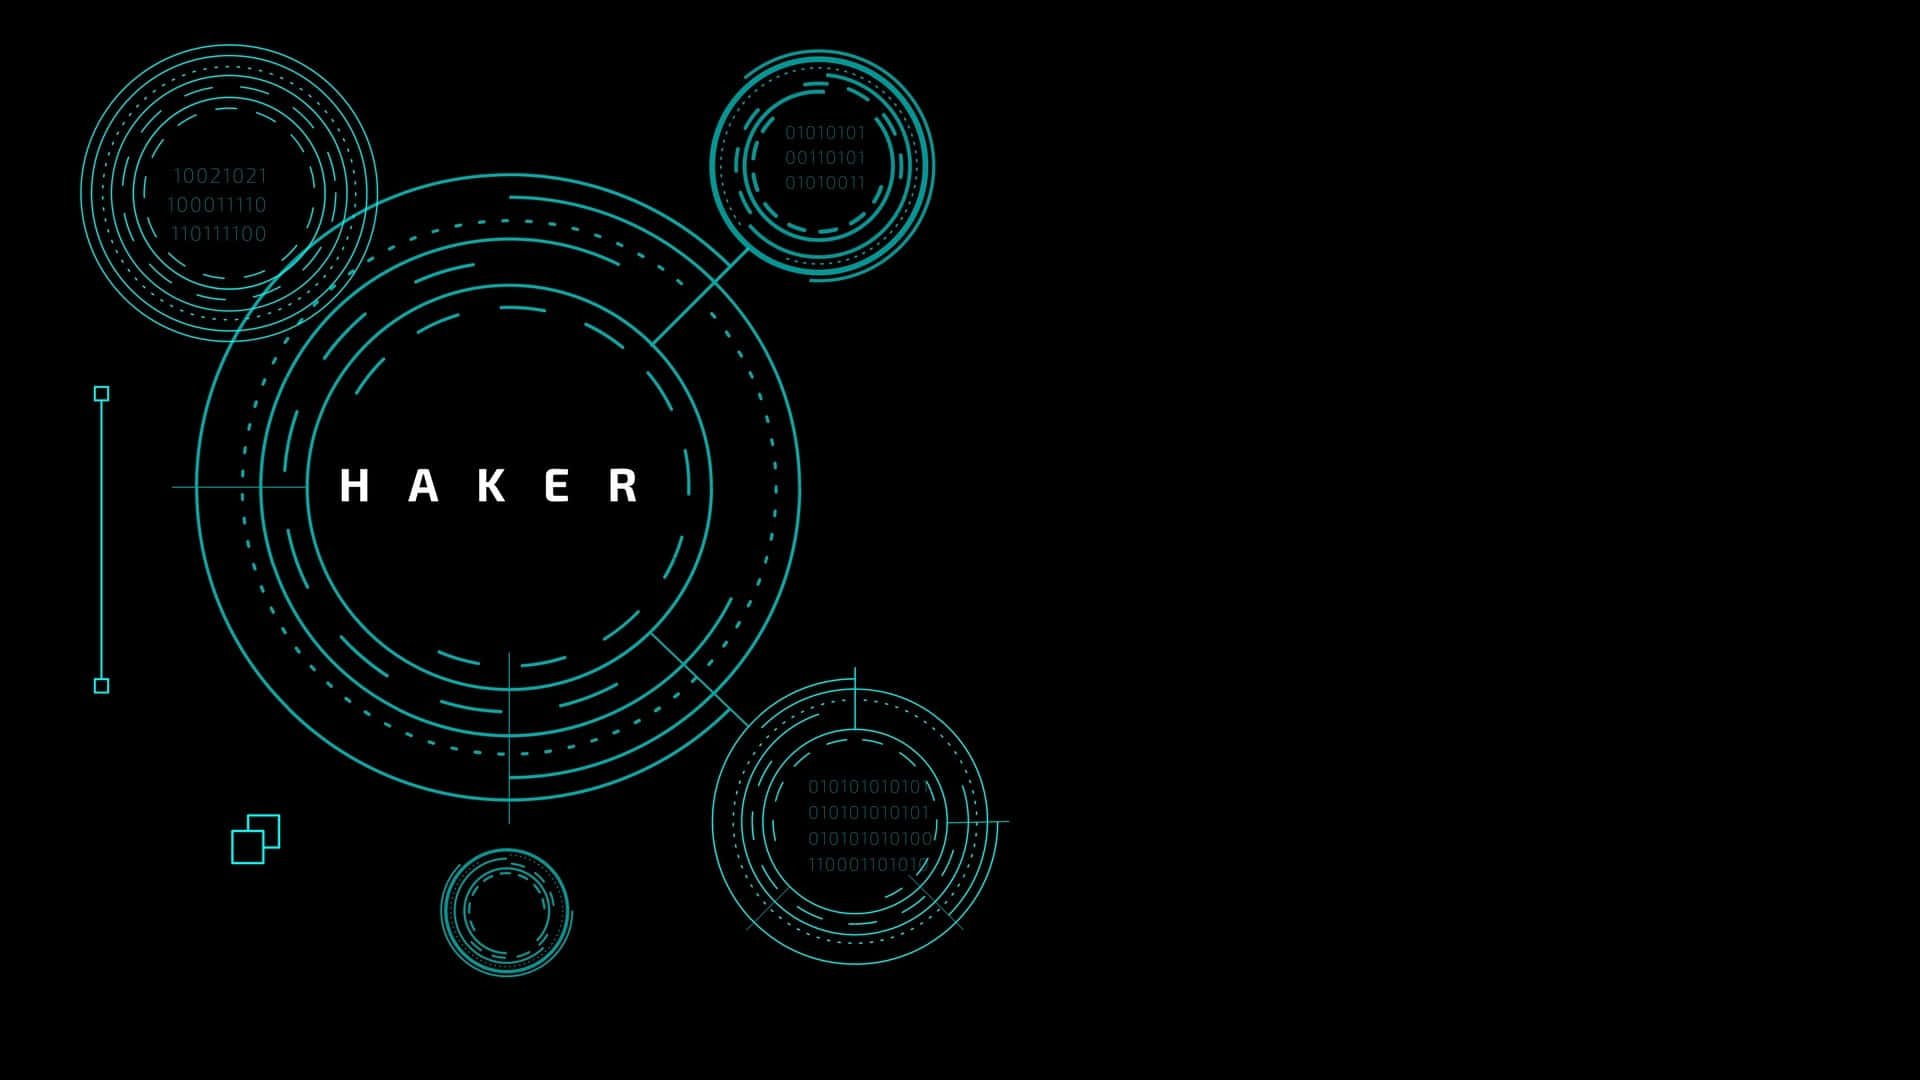 A Black Background With The Word Haker